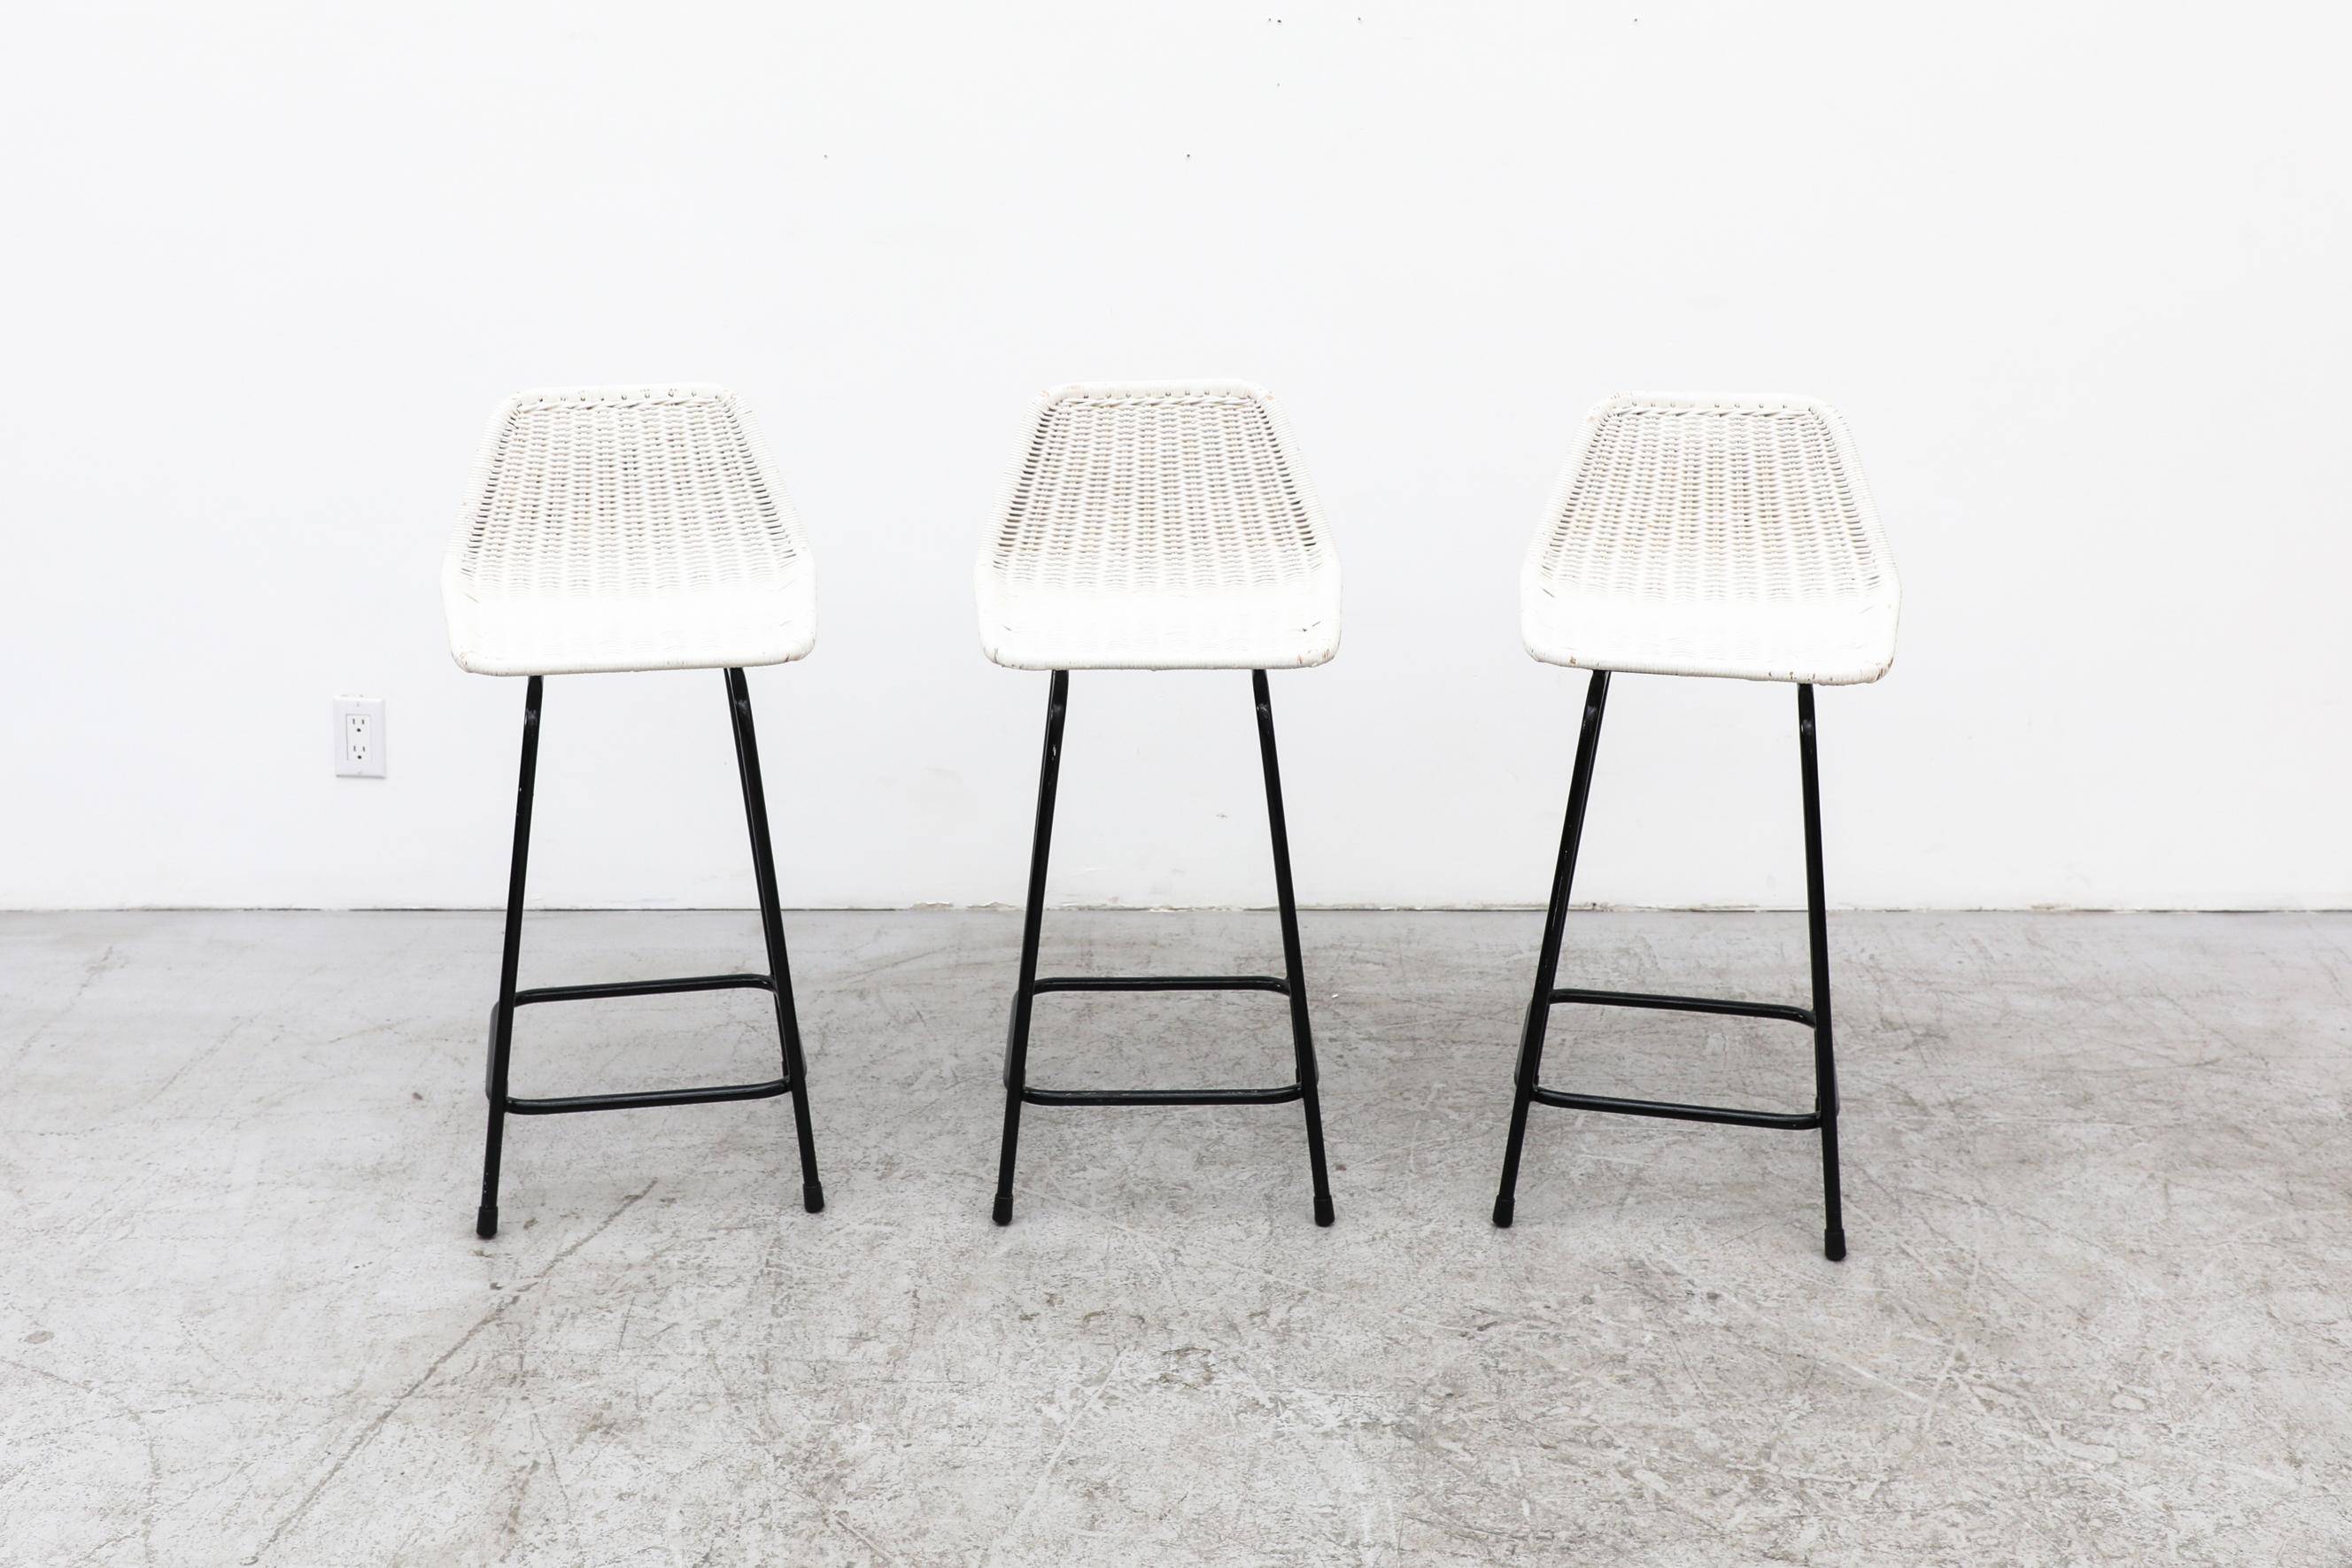 Woven Set of 4 White Wicker Charlotte Perriand Style Counter Height Stools For Sale